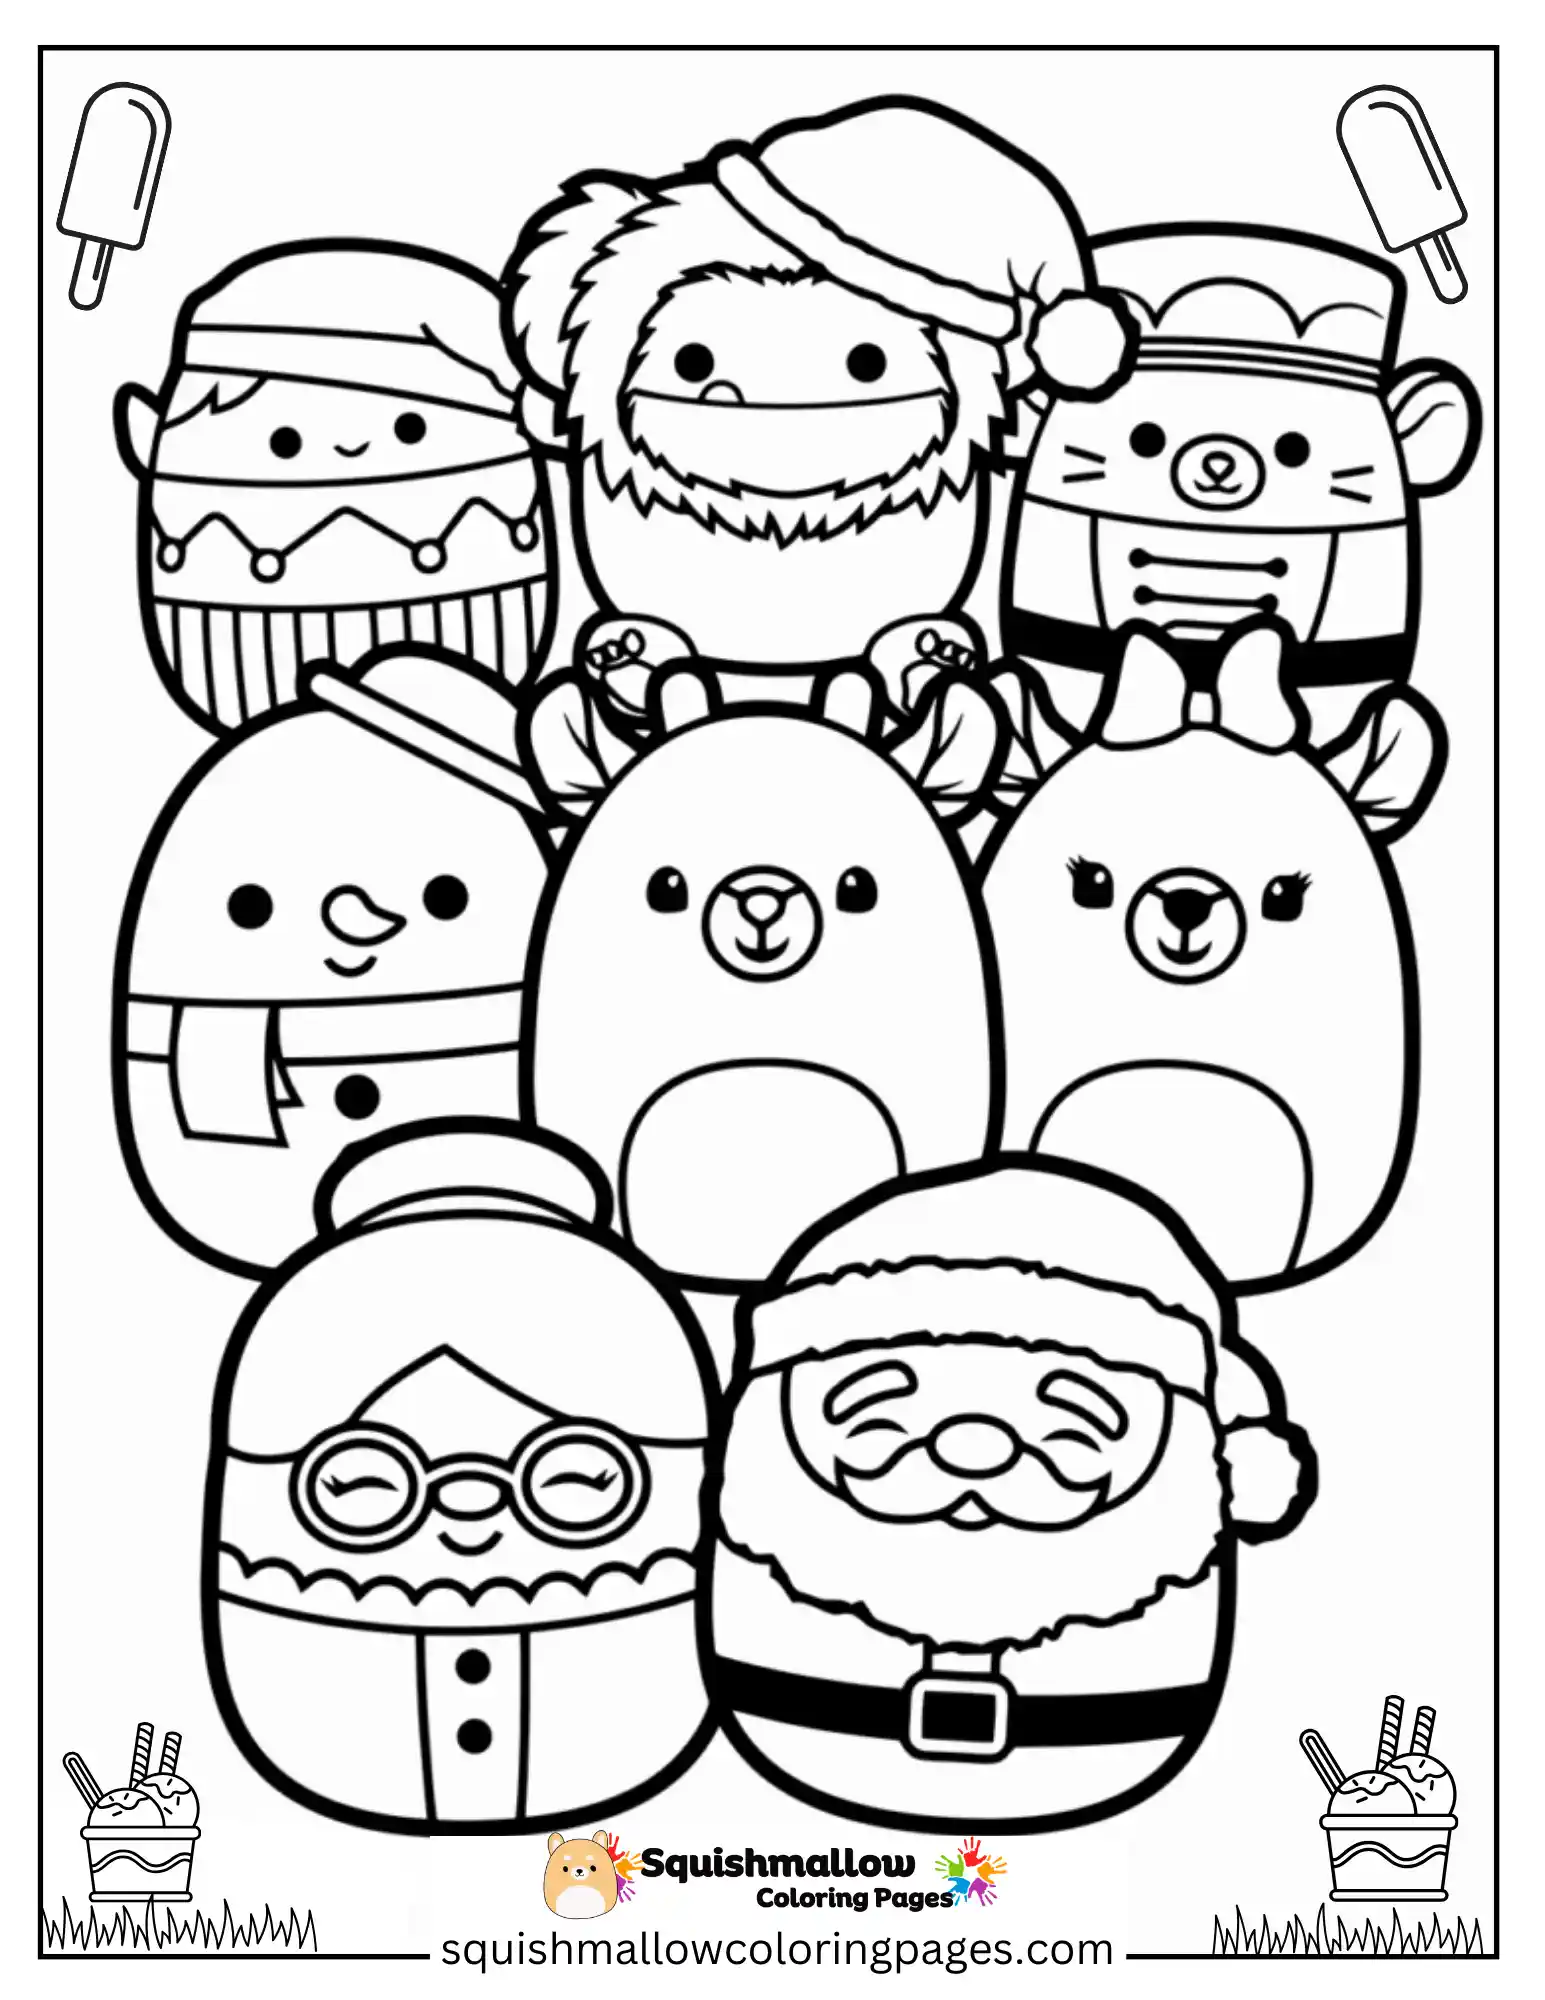 8 Cute Squishmallows Coloring Pages